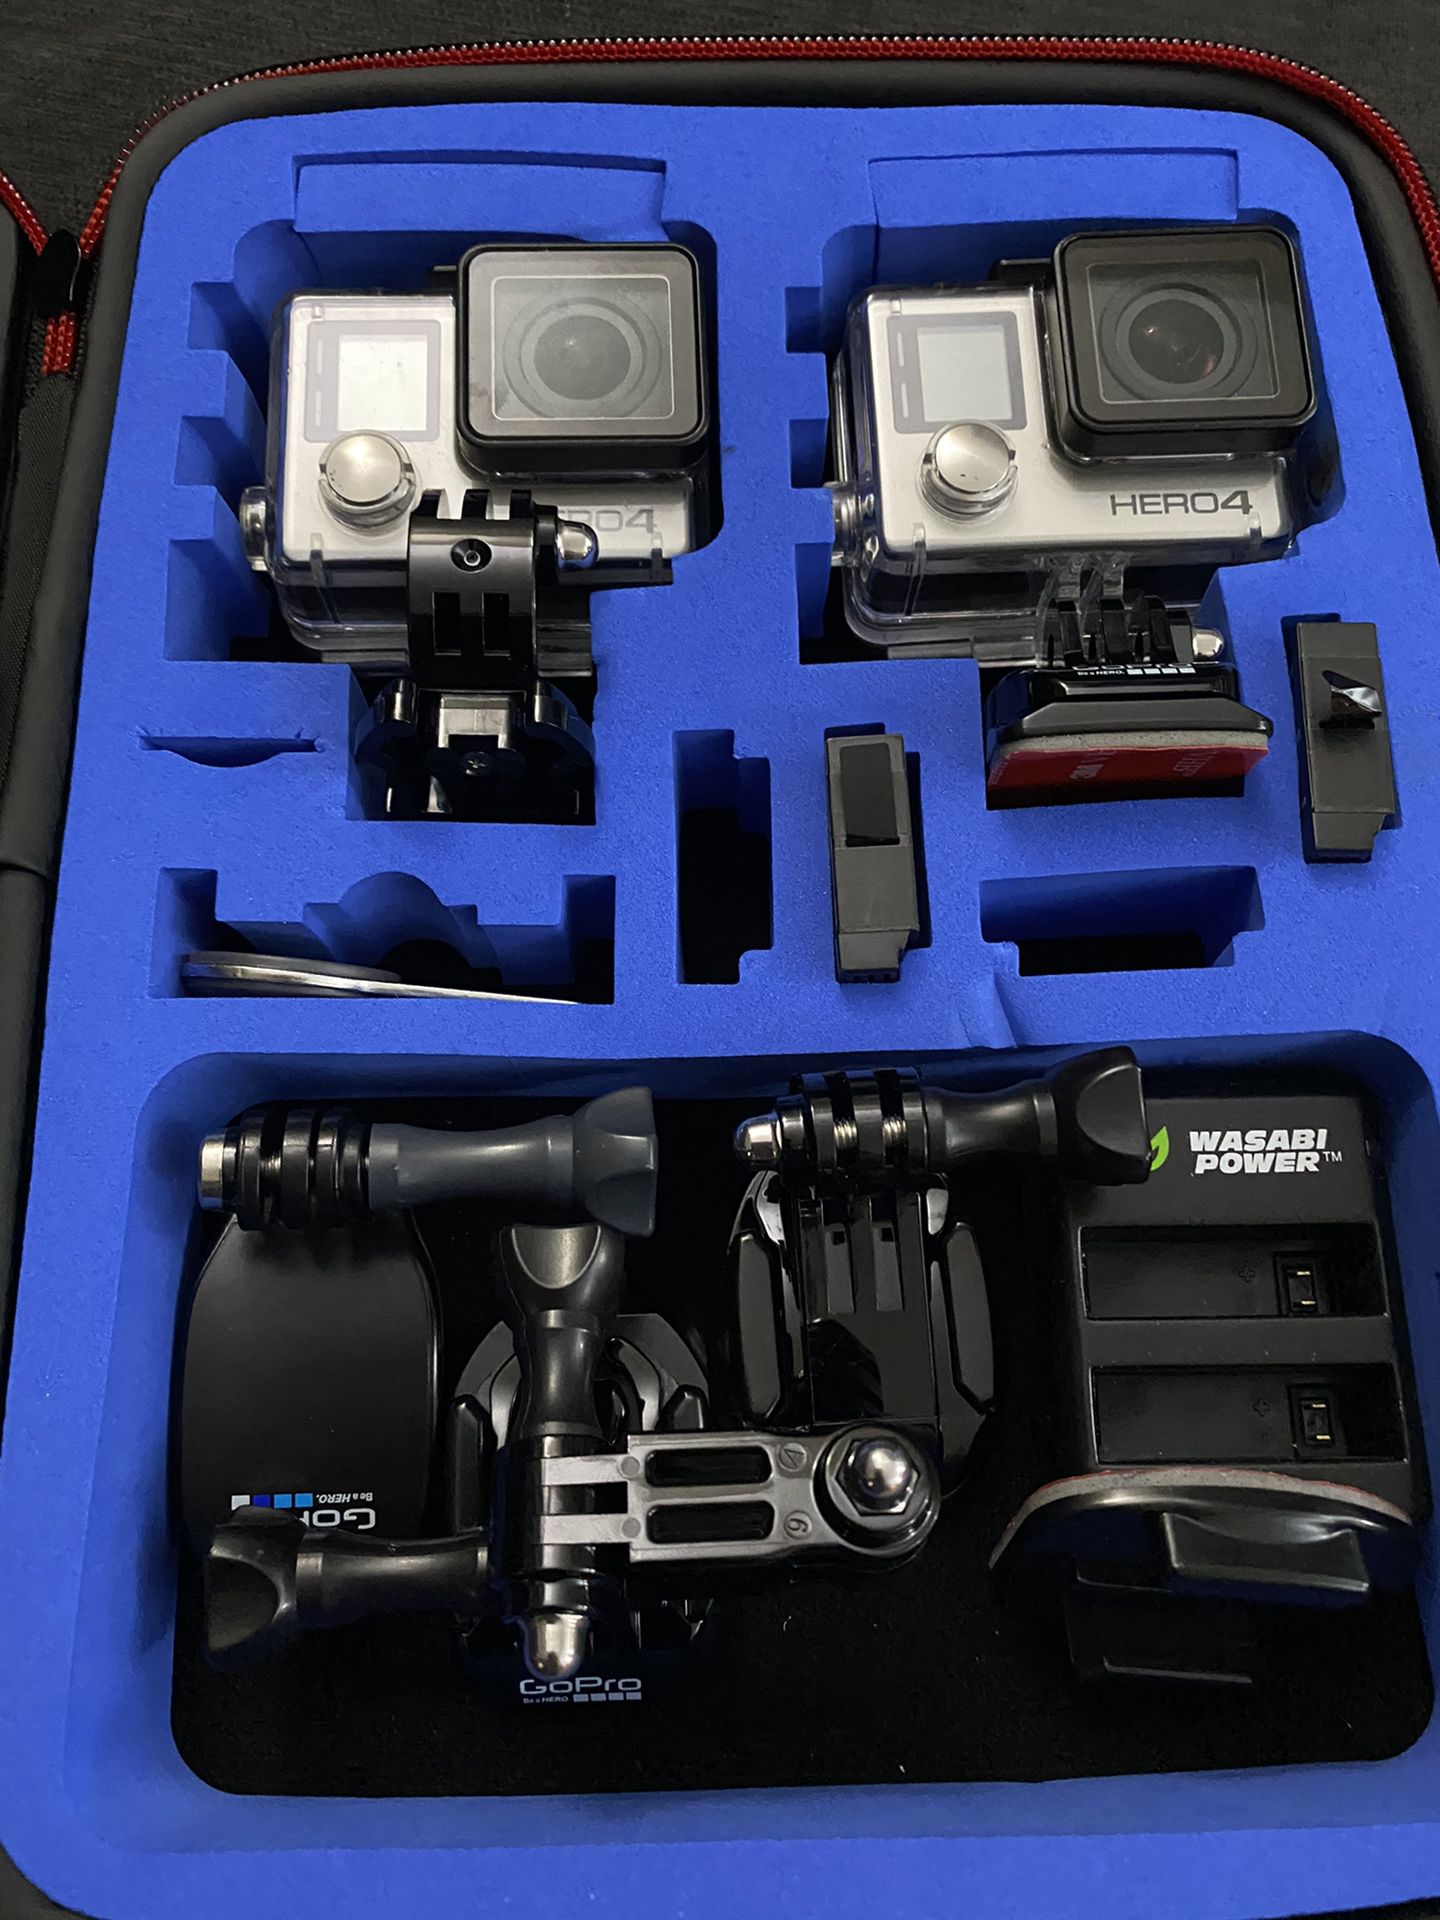 2 GoPro Hero 4 with case and batteries